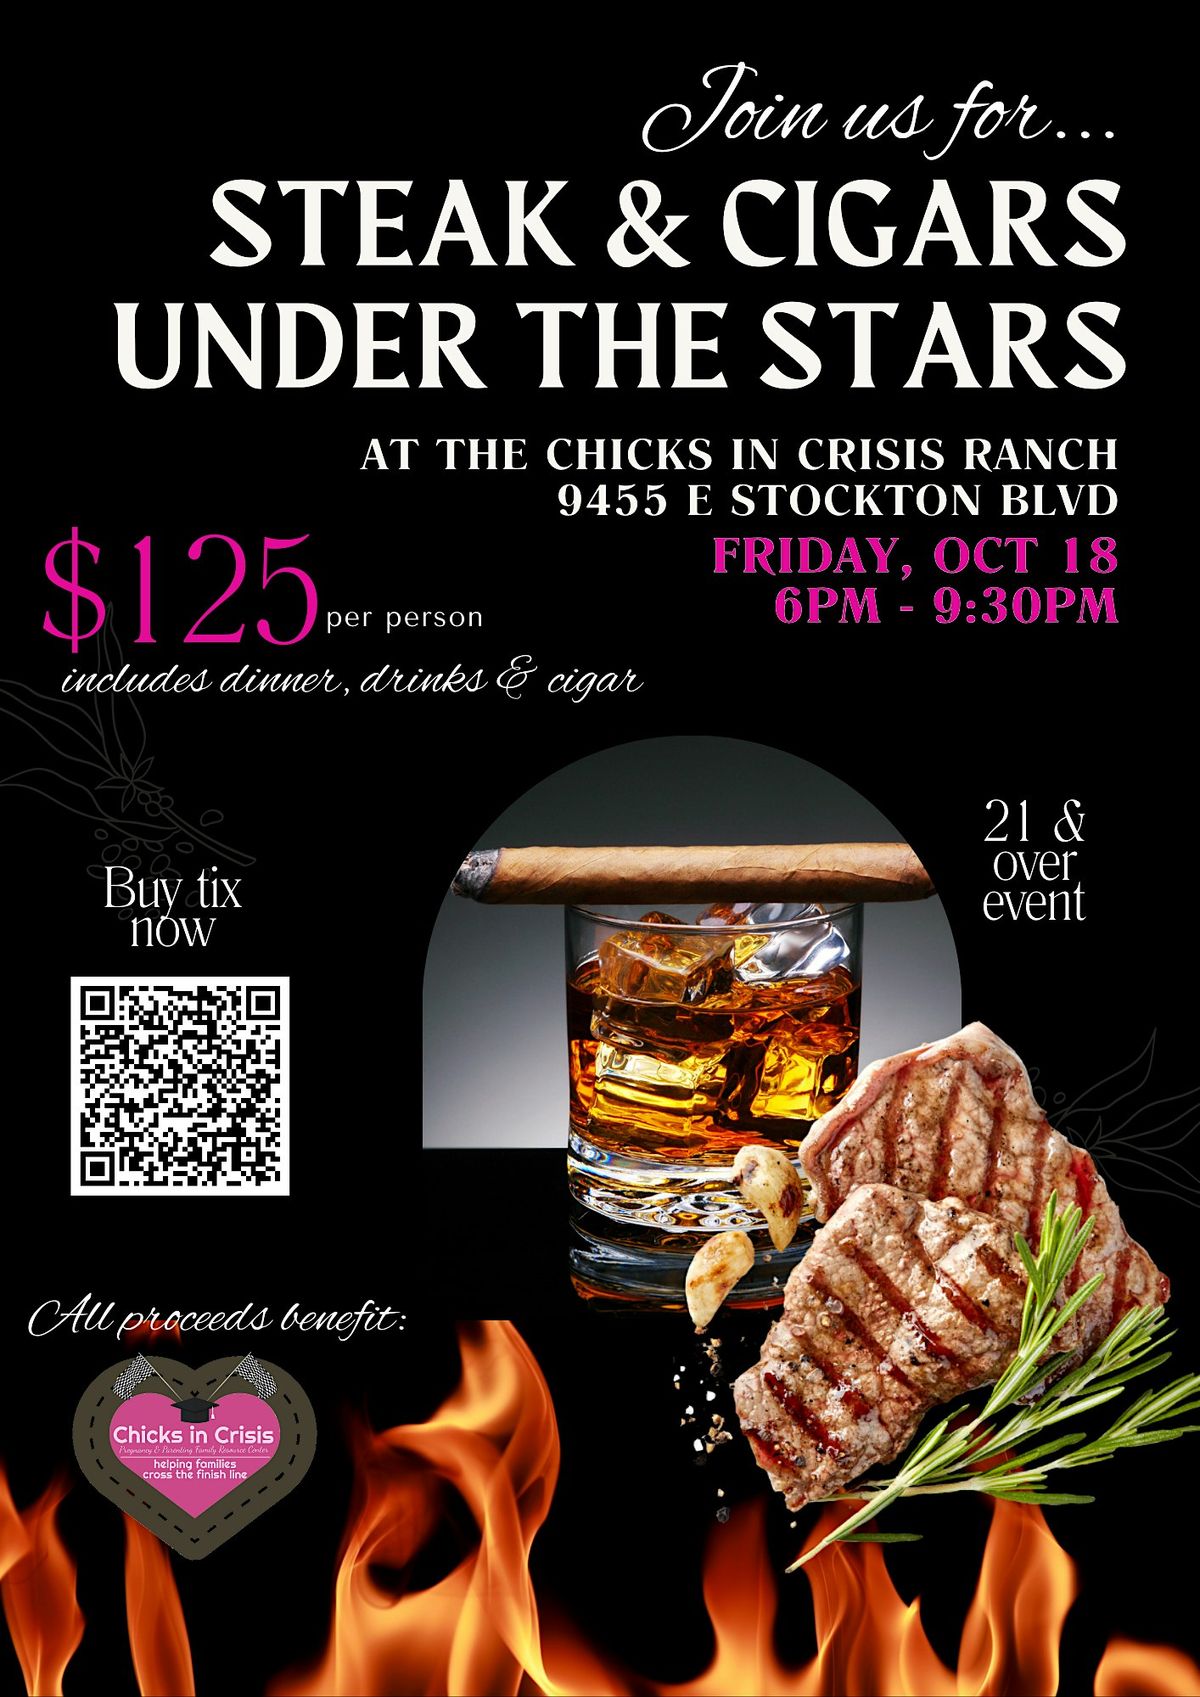 Steak & Cigars Under the Stars for a Cause